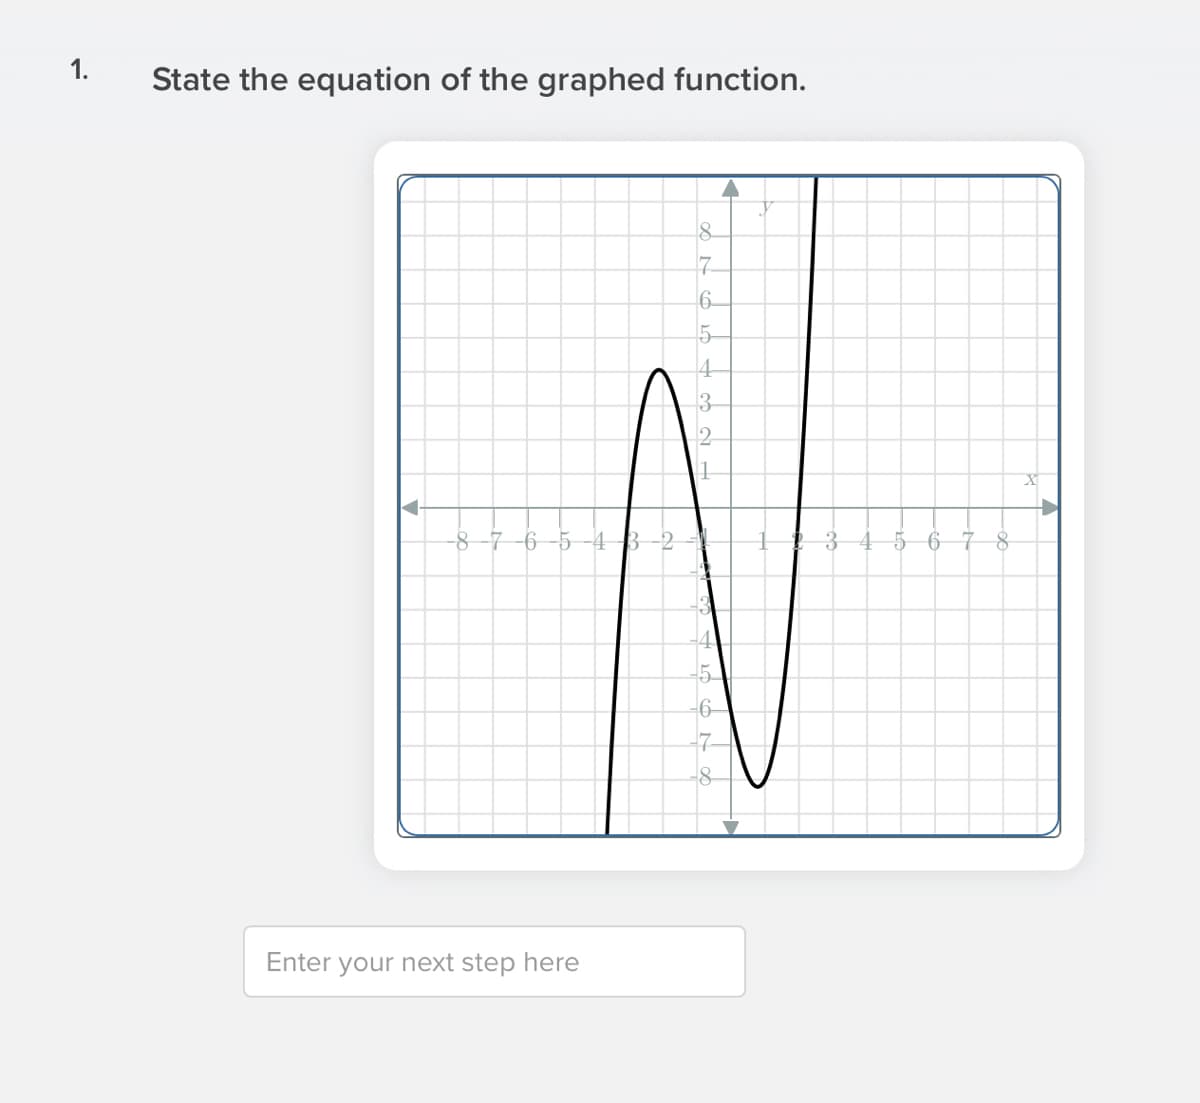 State the equation of the graphed function.
8.
7.
6
15
1
-8-7 -6 -5
3
56 7 8
Enter your next step here
